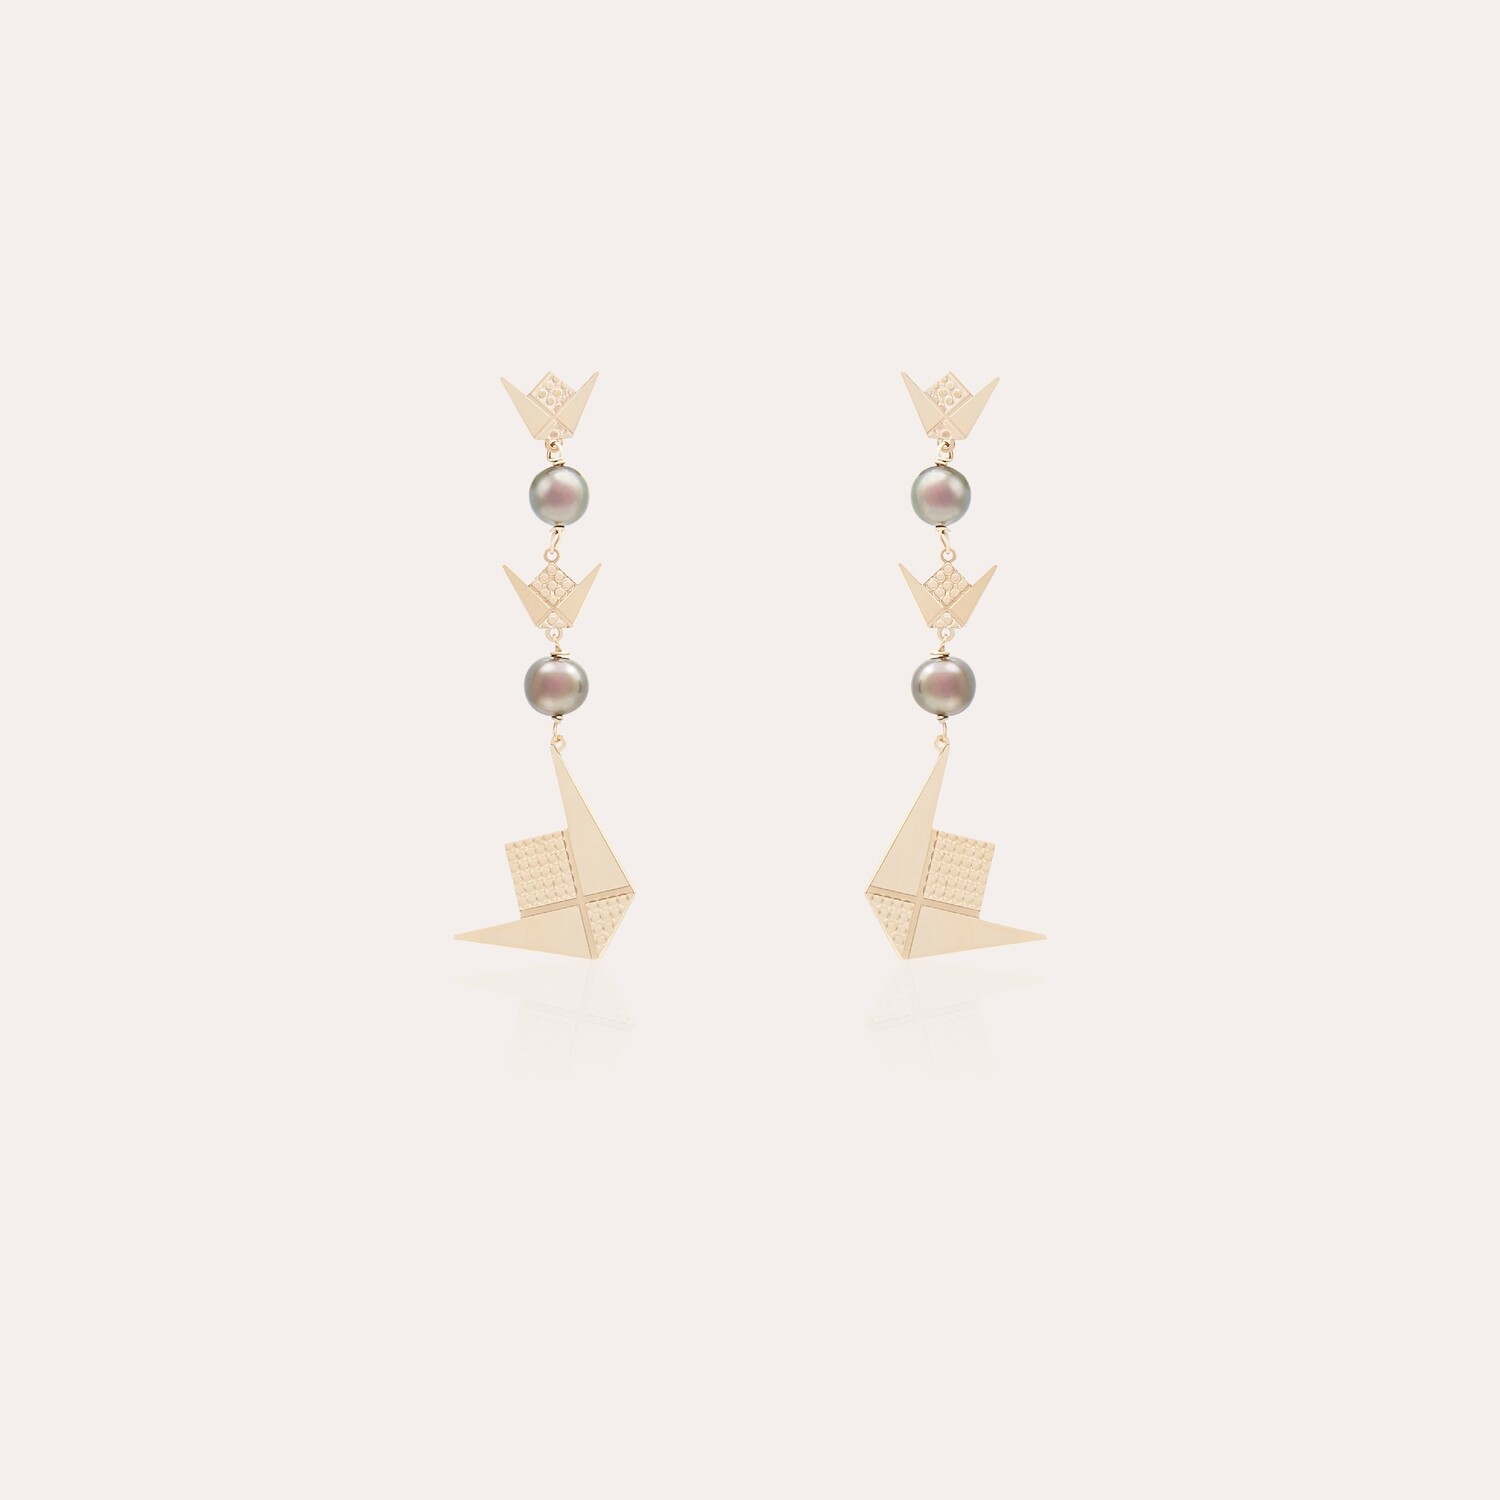 Emblem Gold Earrings with Pearls